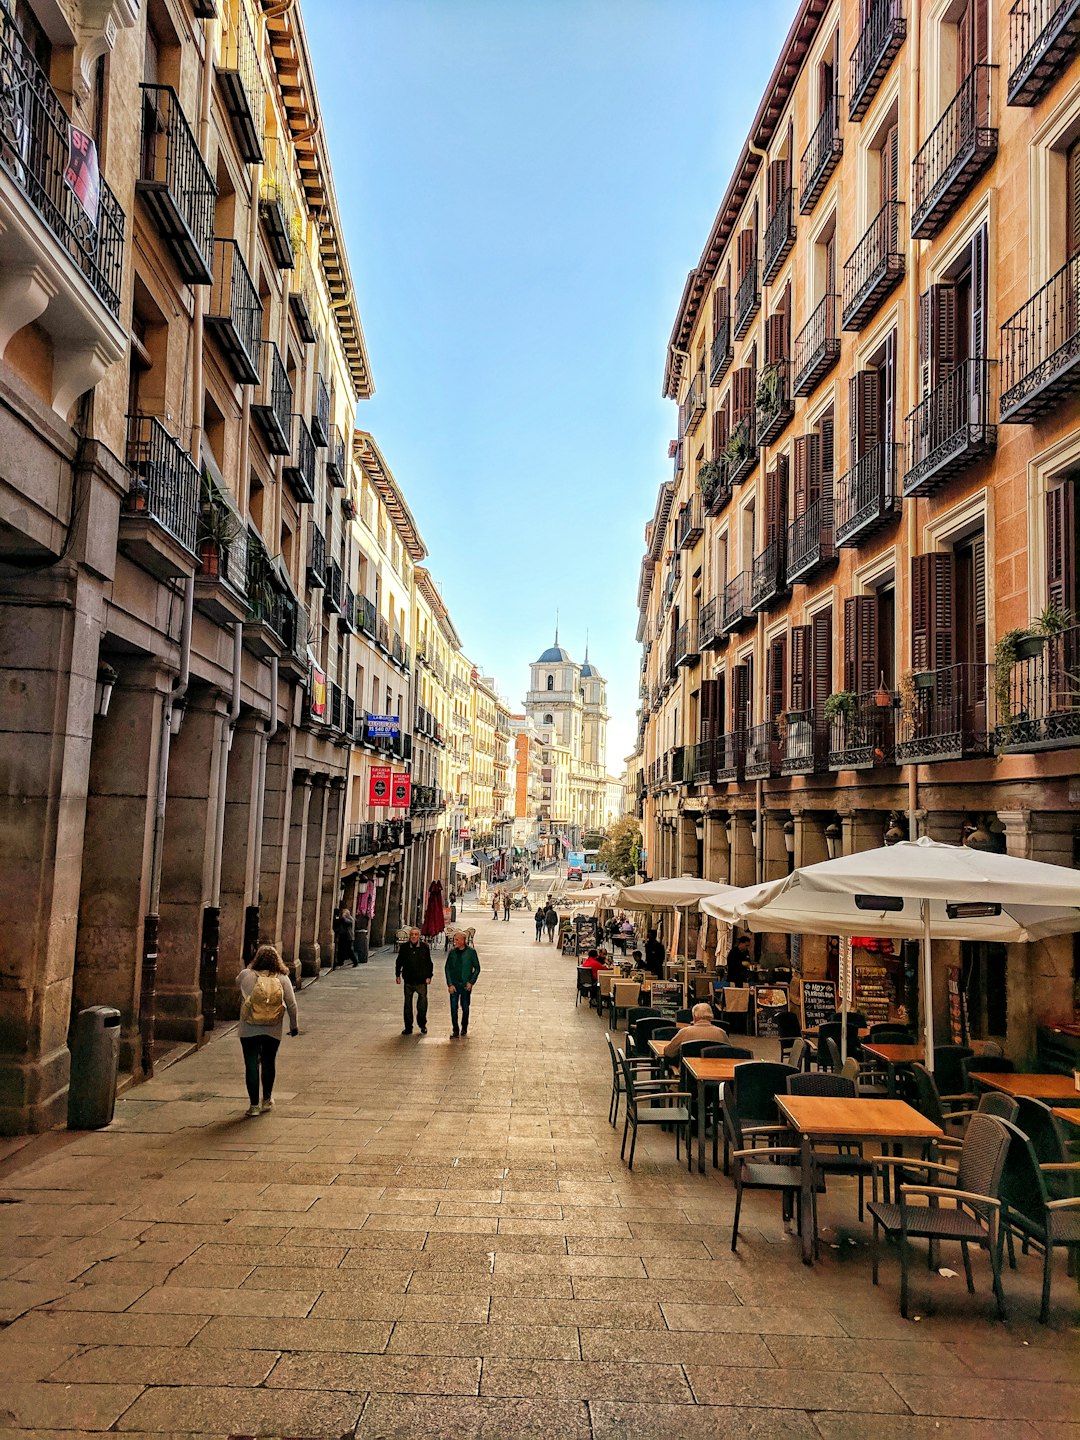 Travel Tips and Stories of Plaza Mayor in Spain